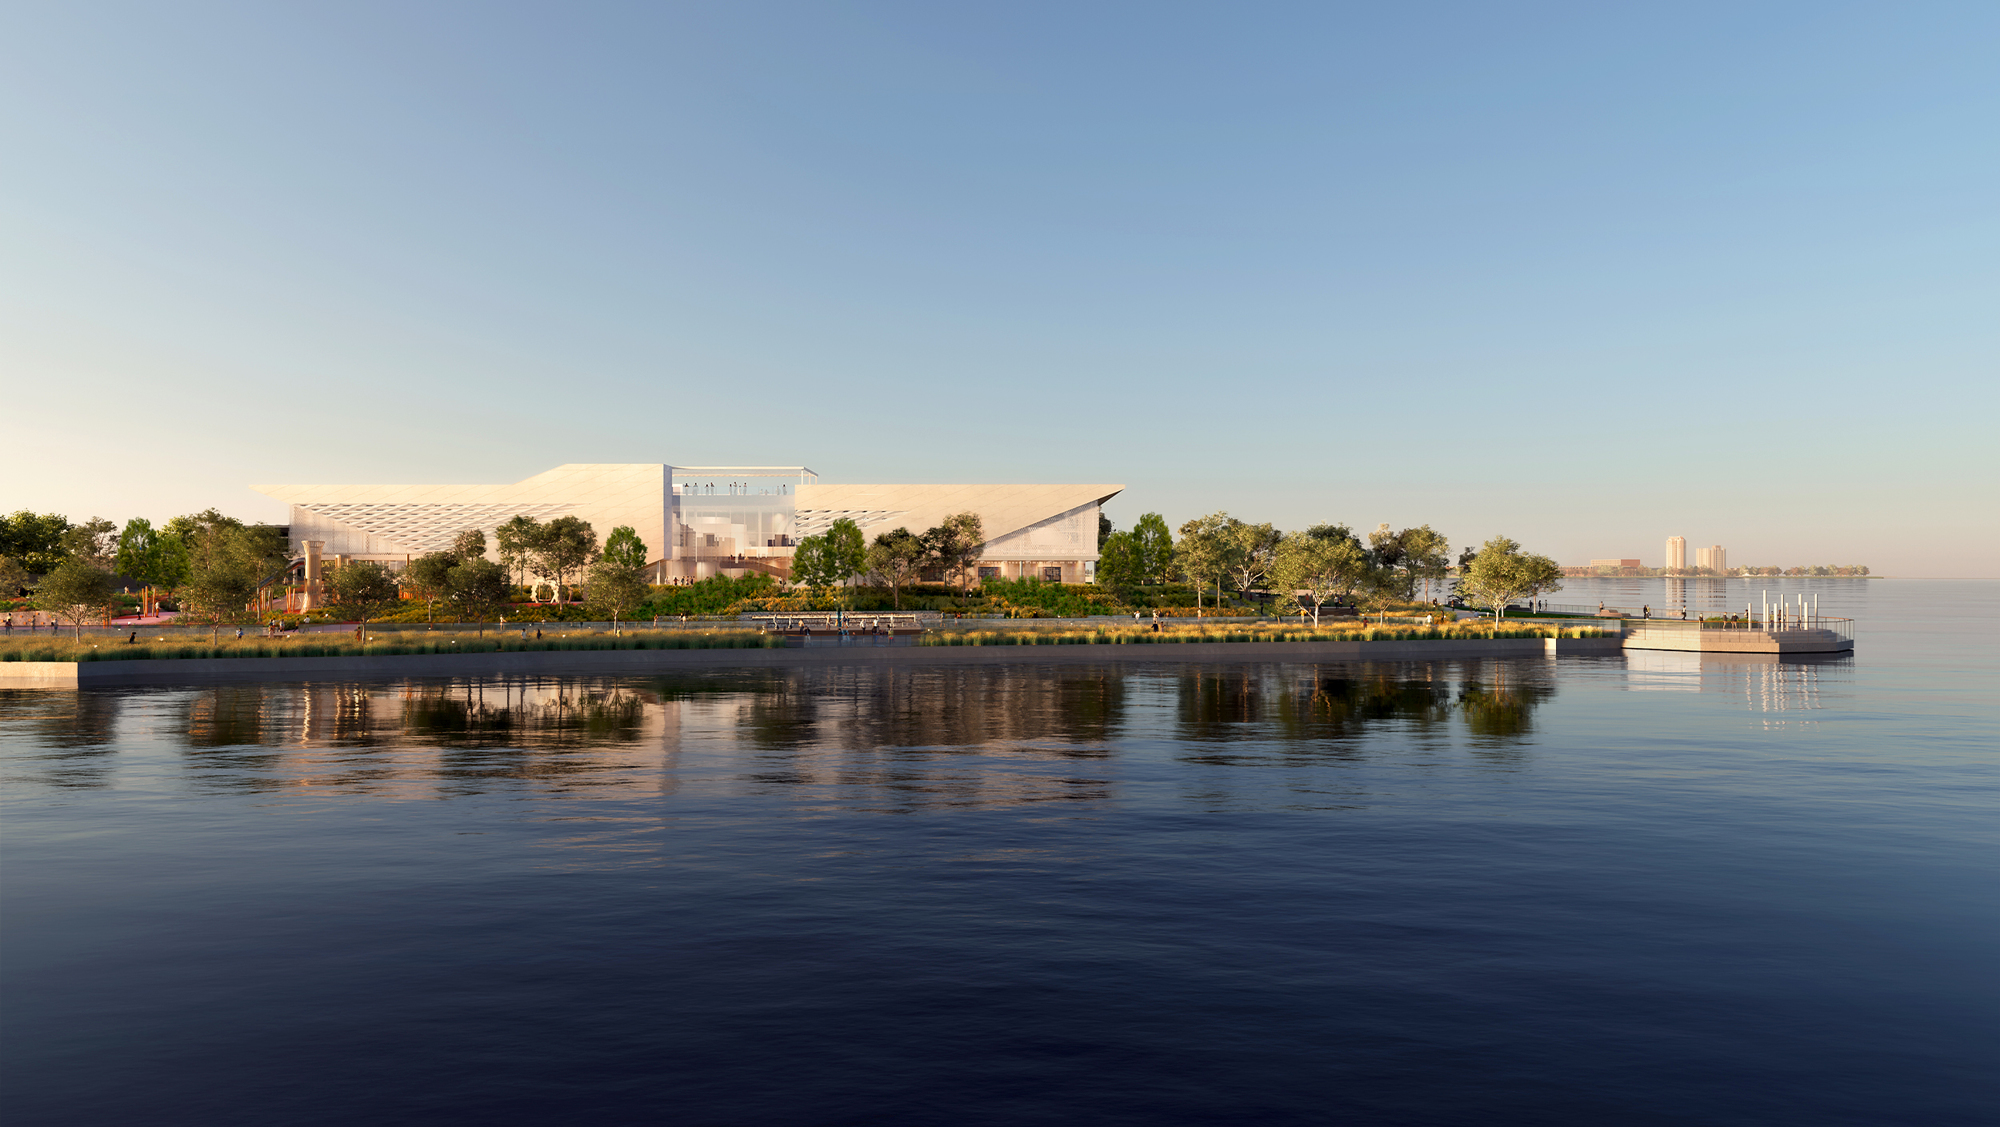 The new MOSH will sit along the St. Johns River.